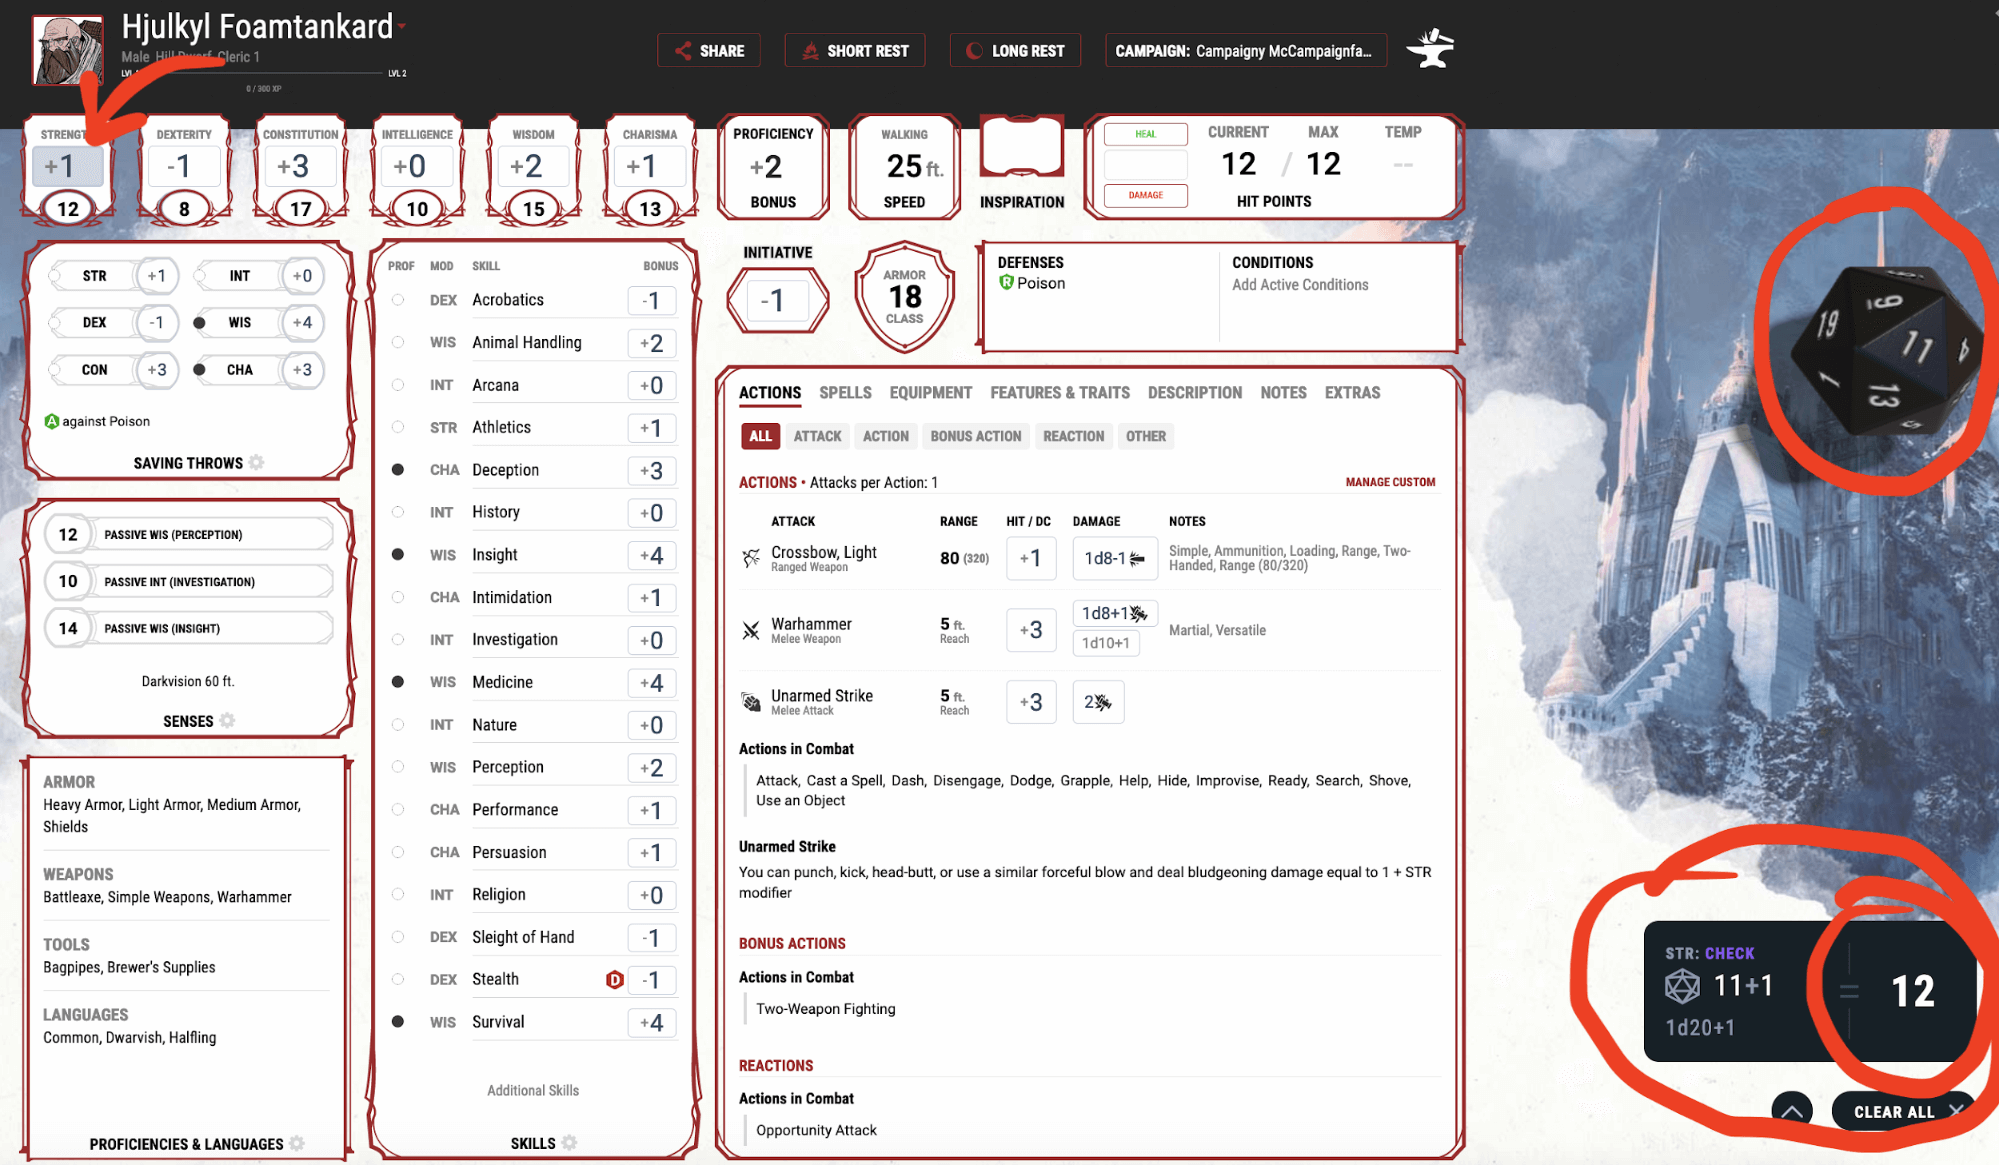 The main character page on www.dndbeyond.com having rolled the dice for a strength check